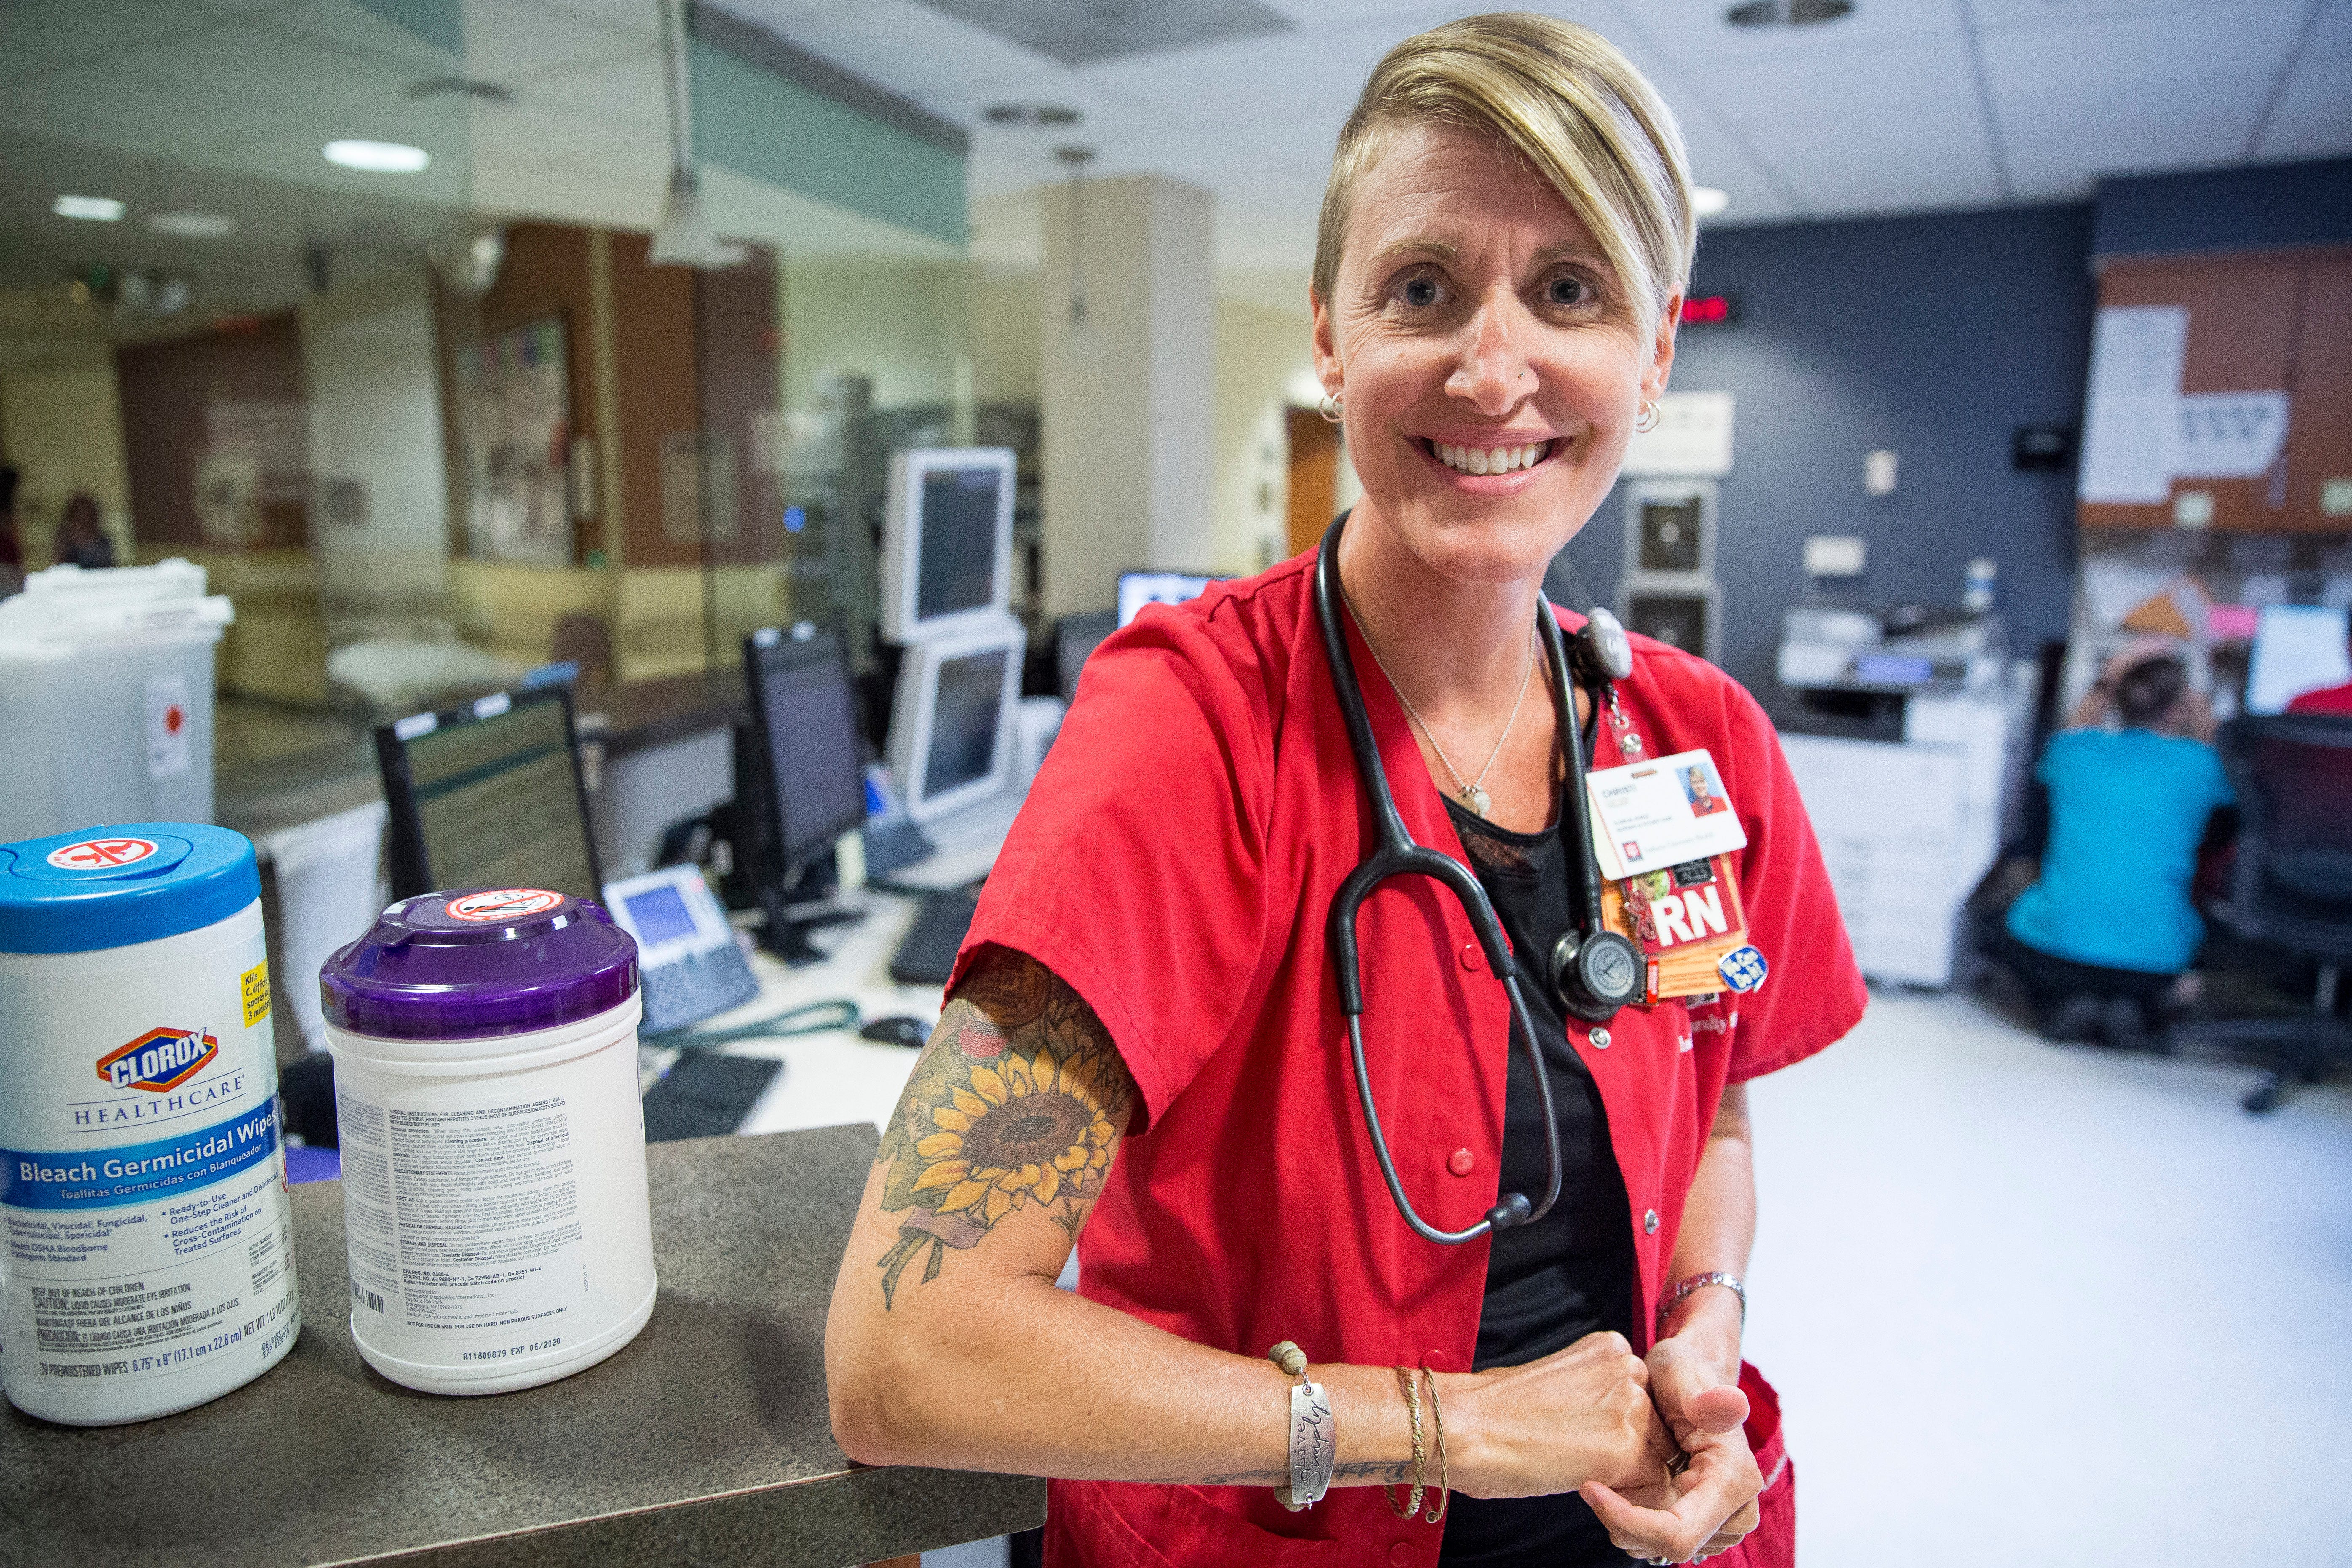 IU Health employee tattoo policy: Is this a trend among workplaces?